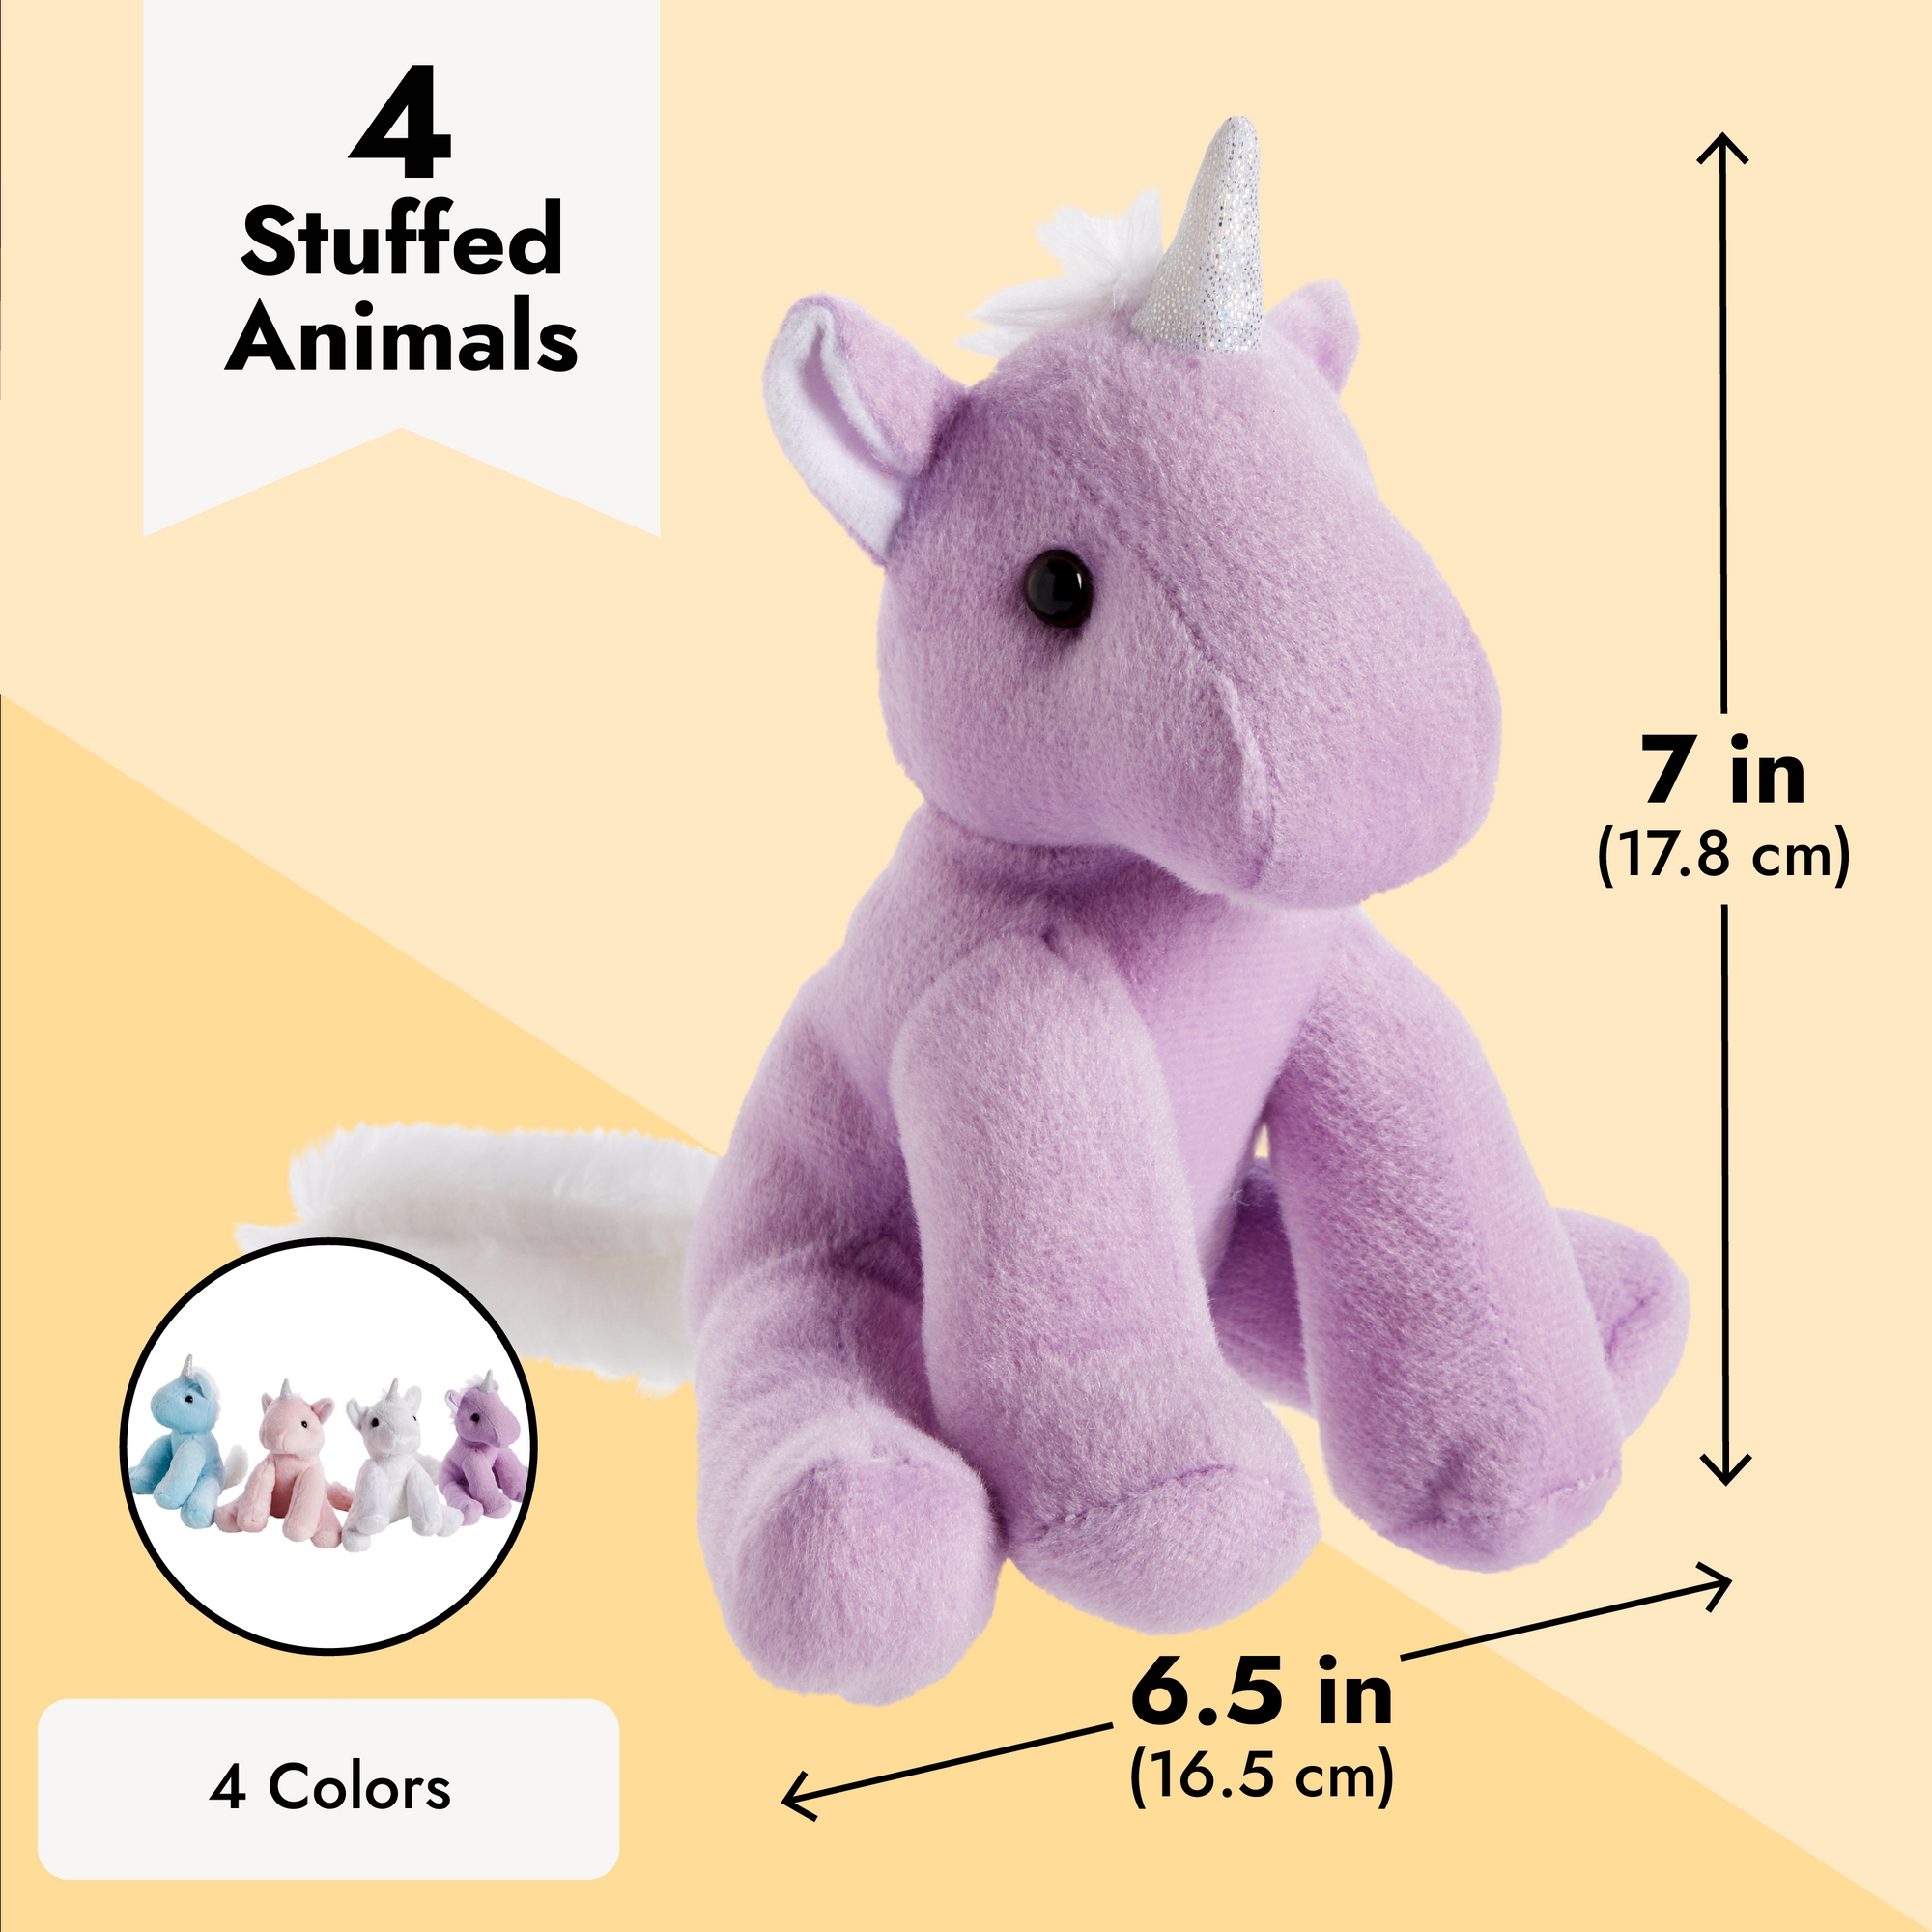 4 Pack Small Unicorn Plush for Girls, 7-inch Stuffed Animal Toys for Kids Birthday Gifts, Pastel Party Favors (4 Colors) - image 4 of 10